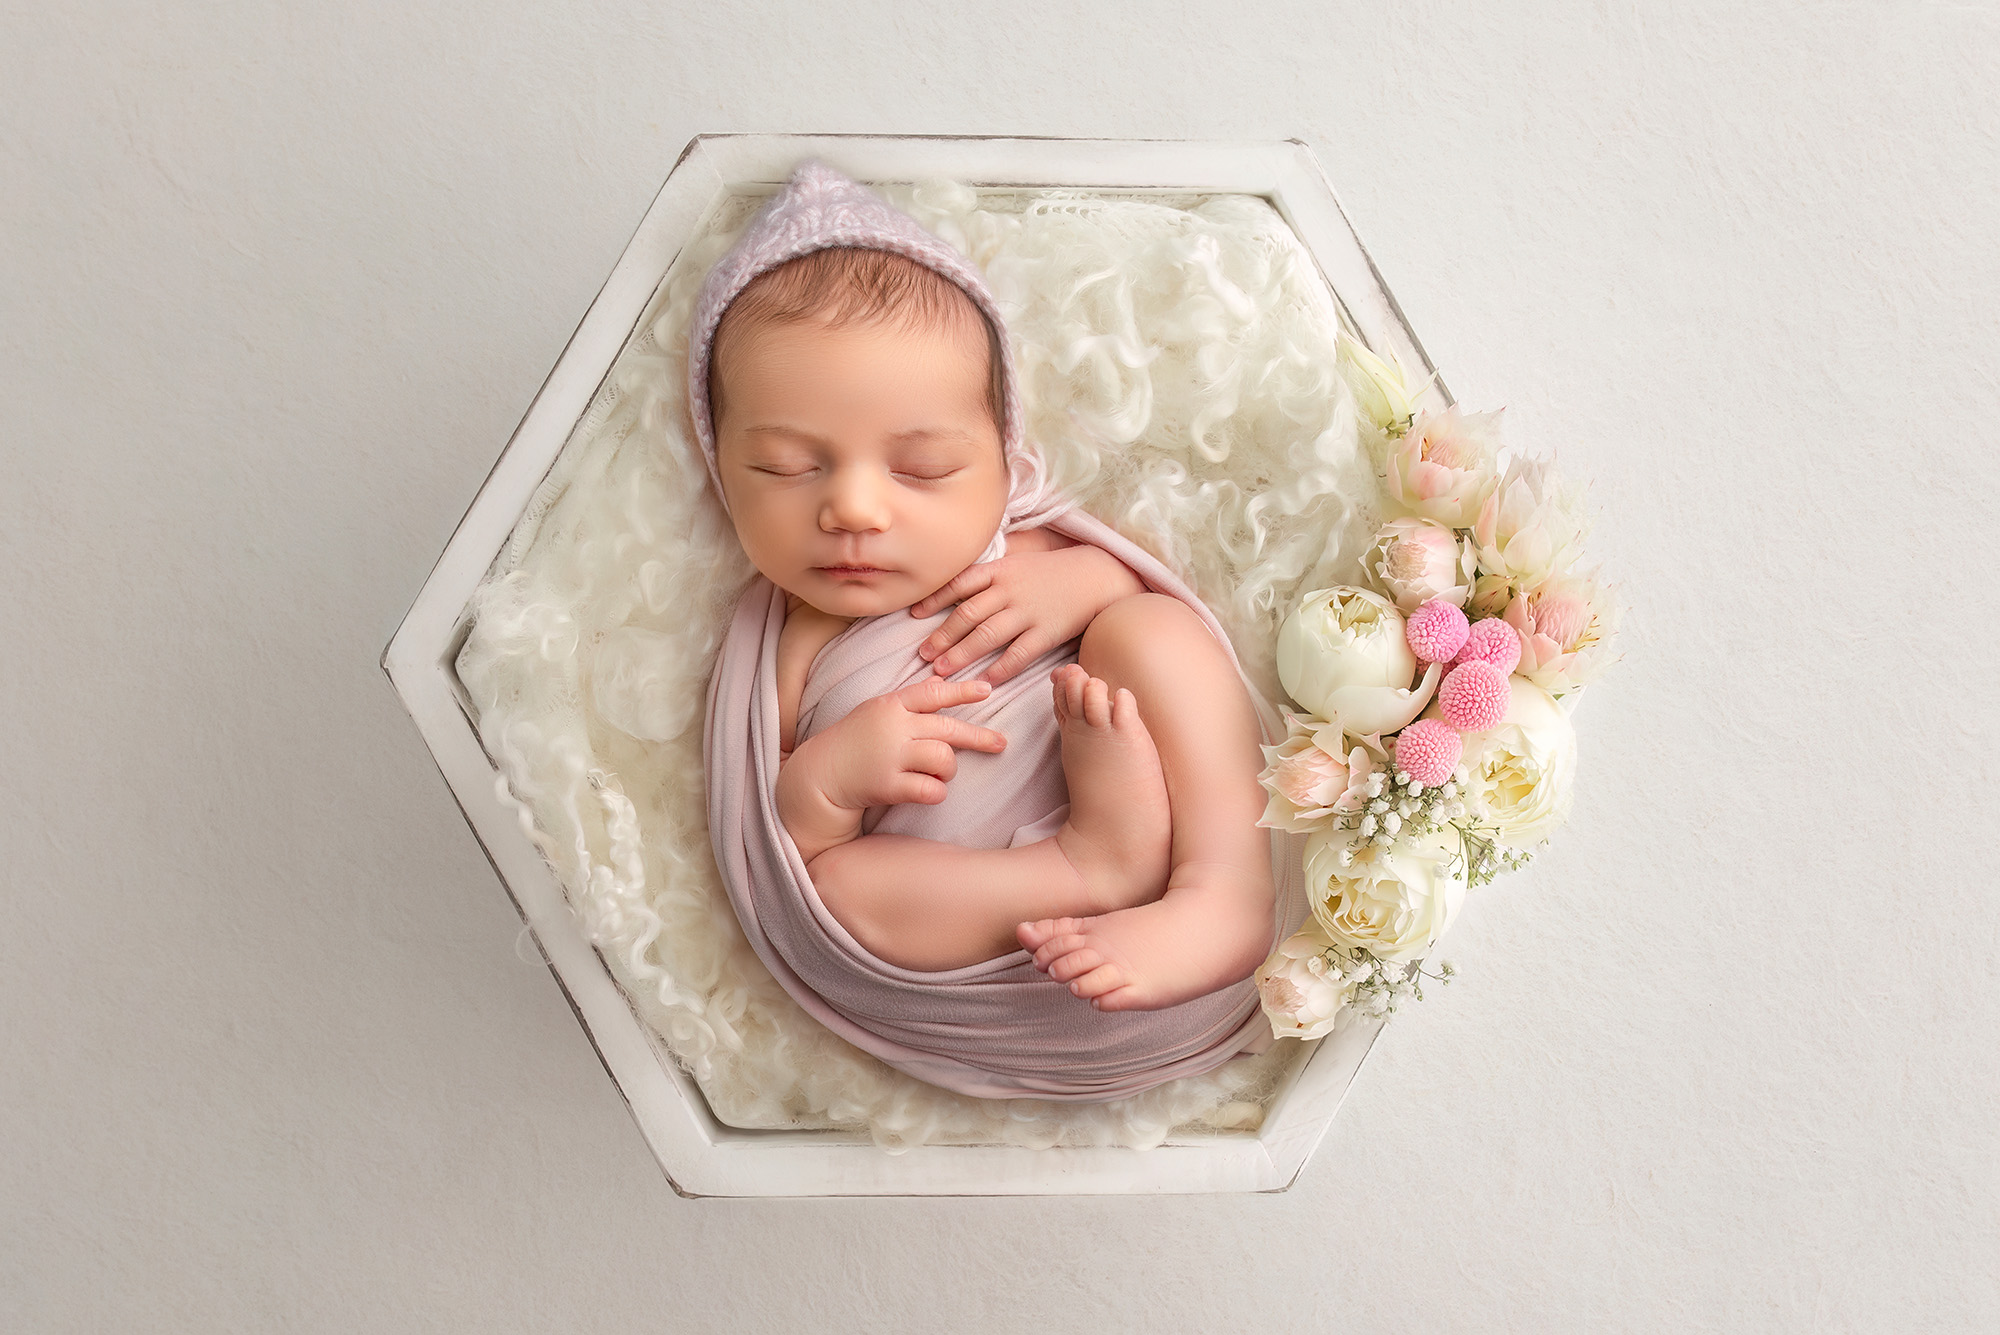 Baby girl laying in a white wooden bowl in as pastel colored wrap, next to pale colored florals.